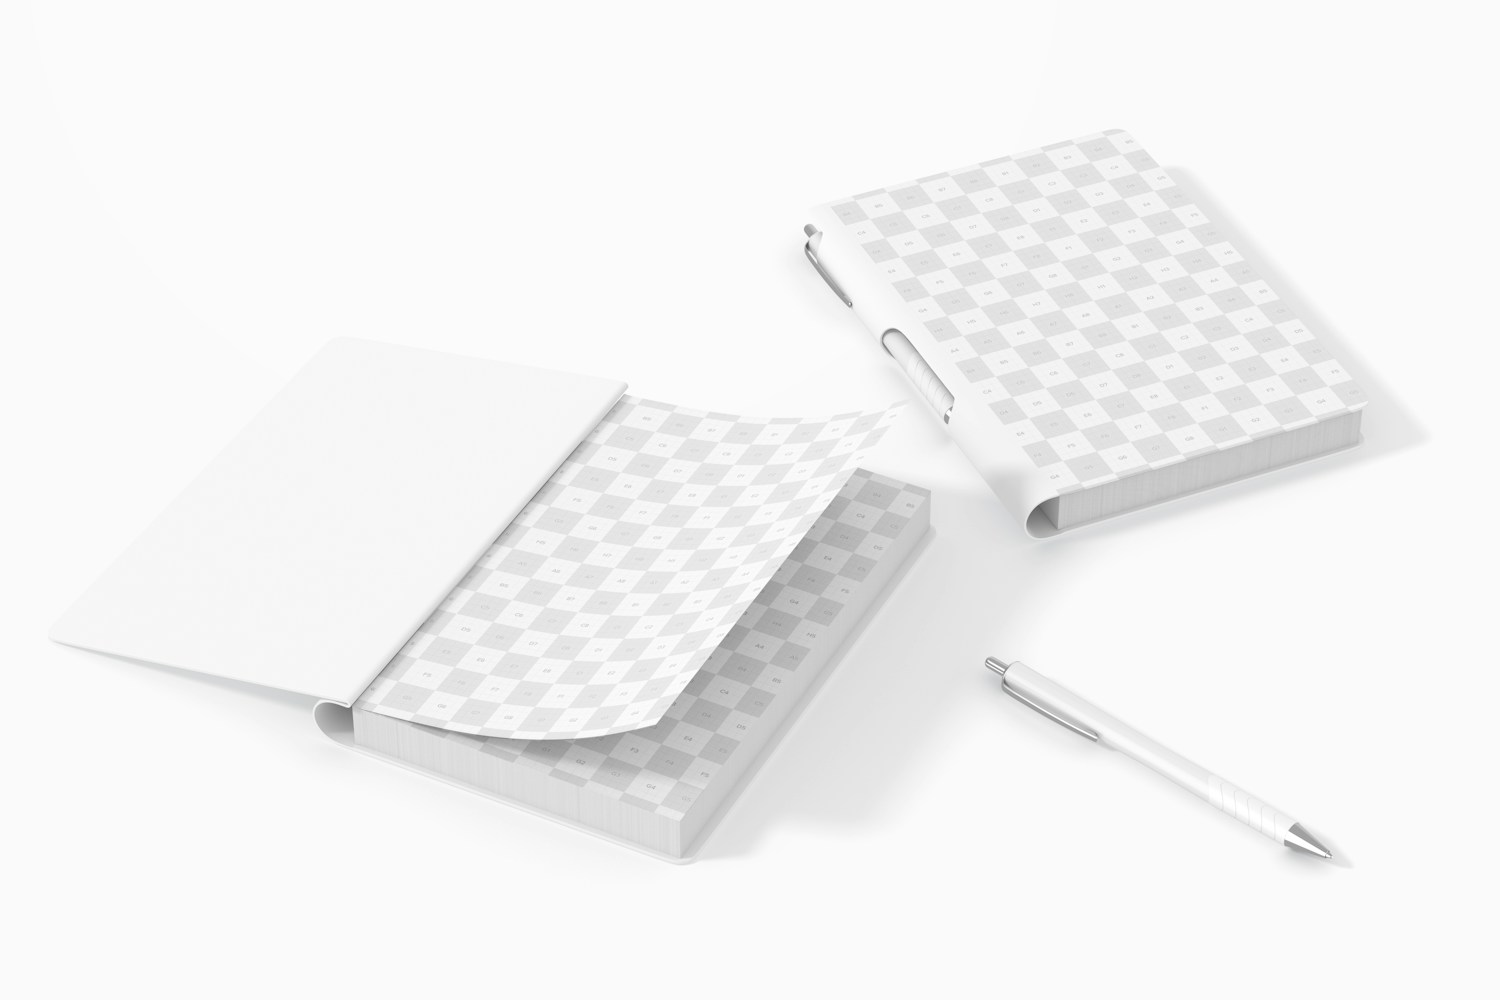 Notebooks with Lateral Pen Holder Mockup, Opened and Closed